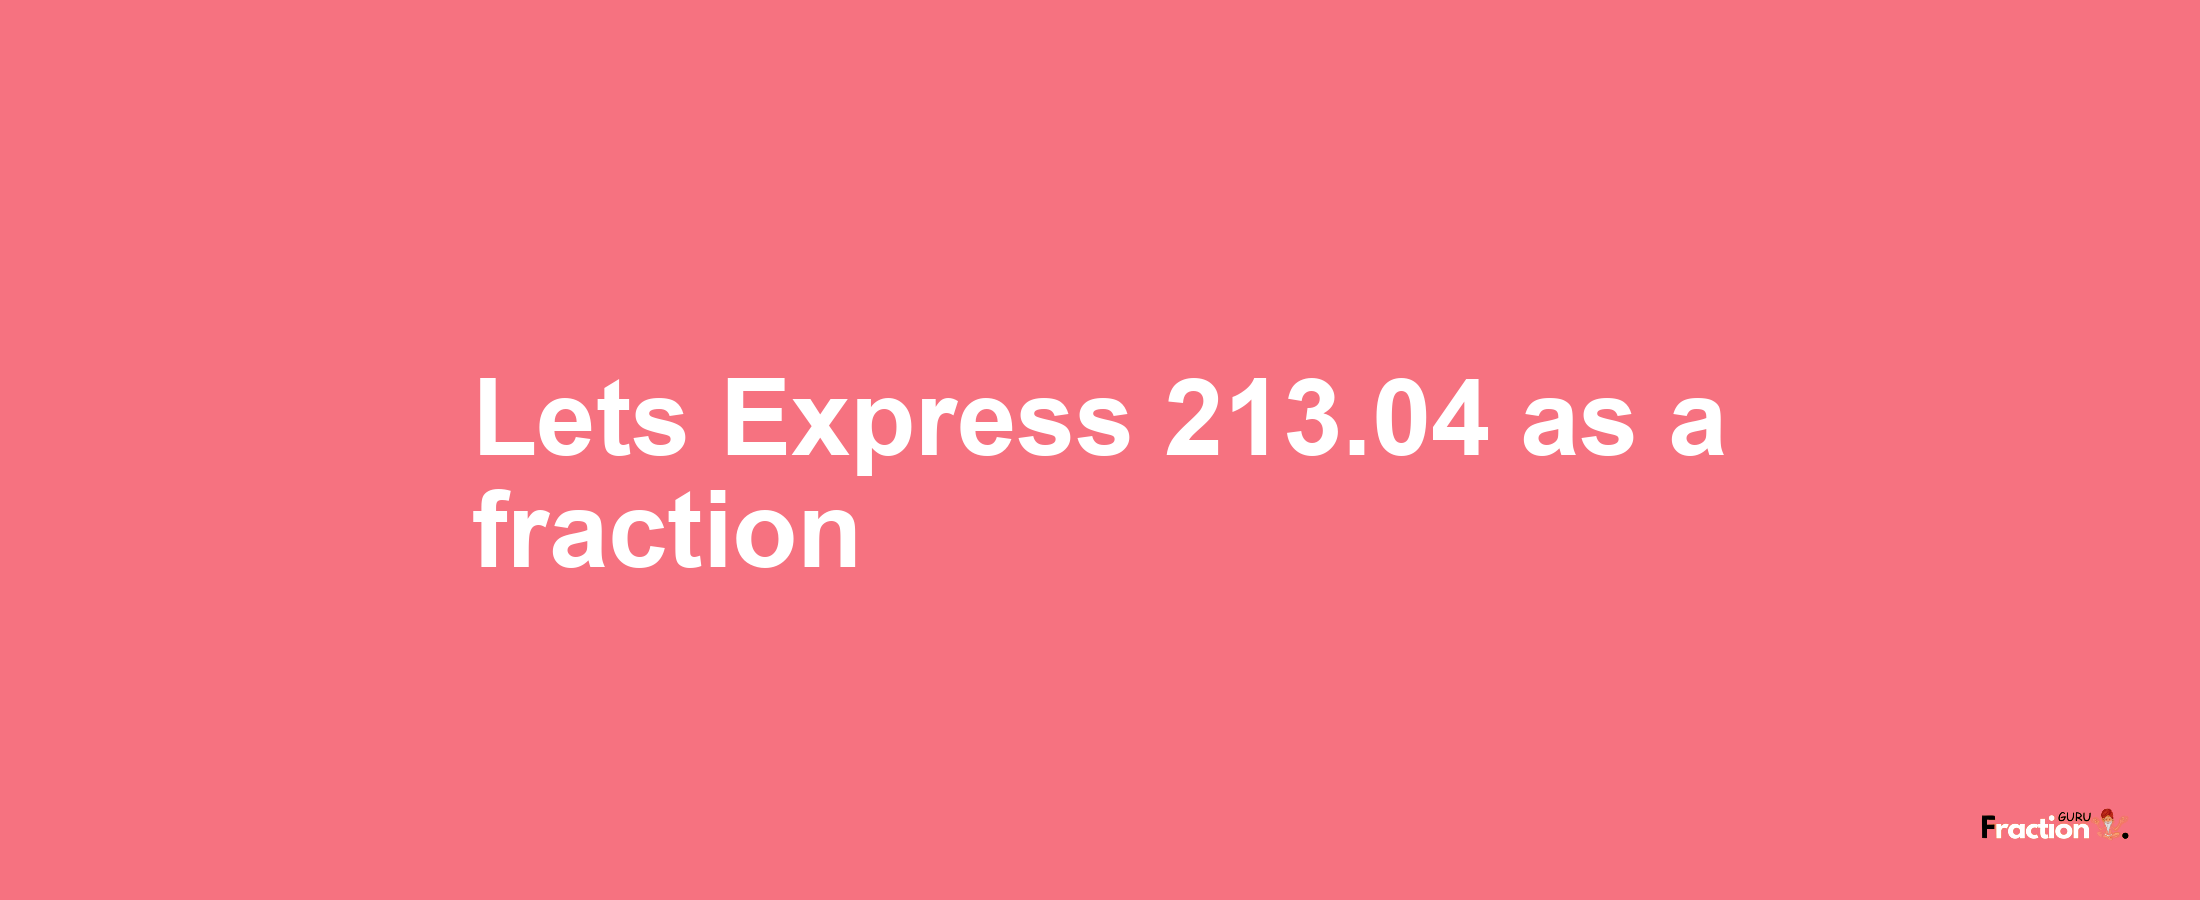 Lets Express 213.04 as afraction